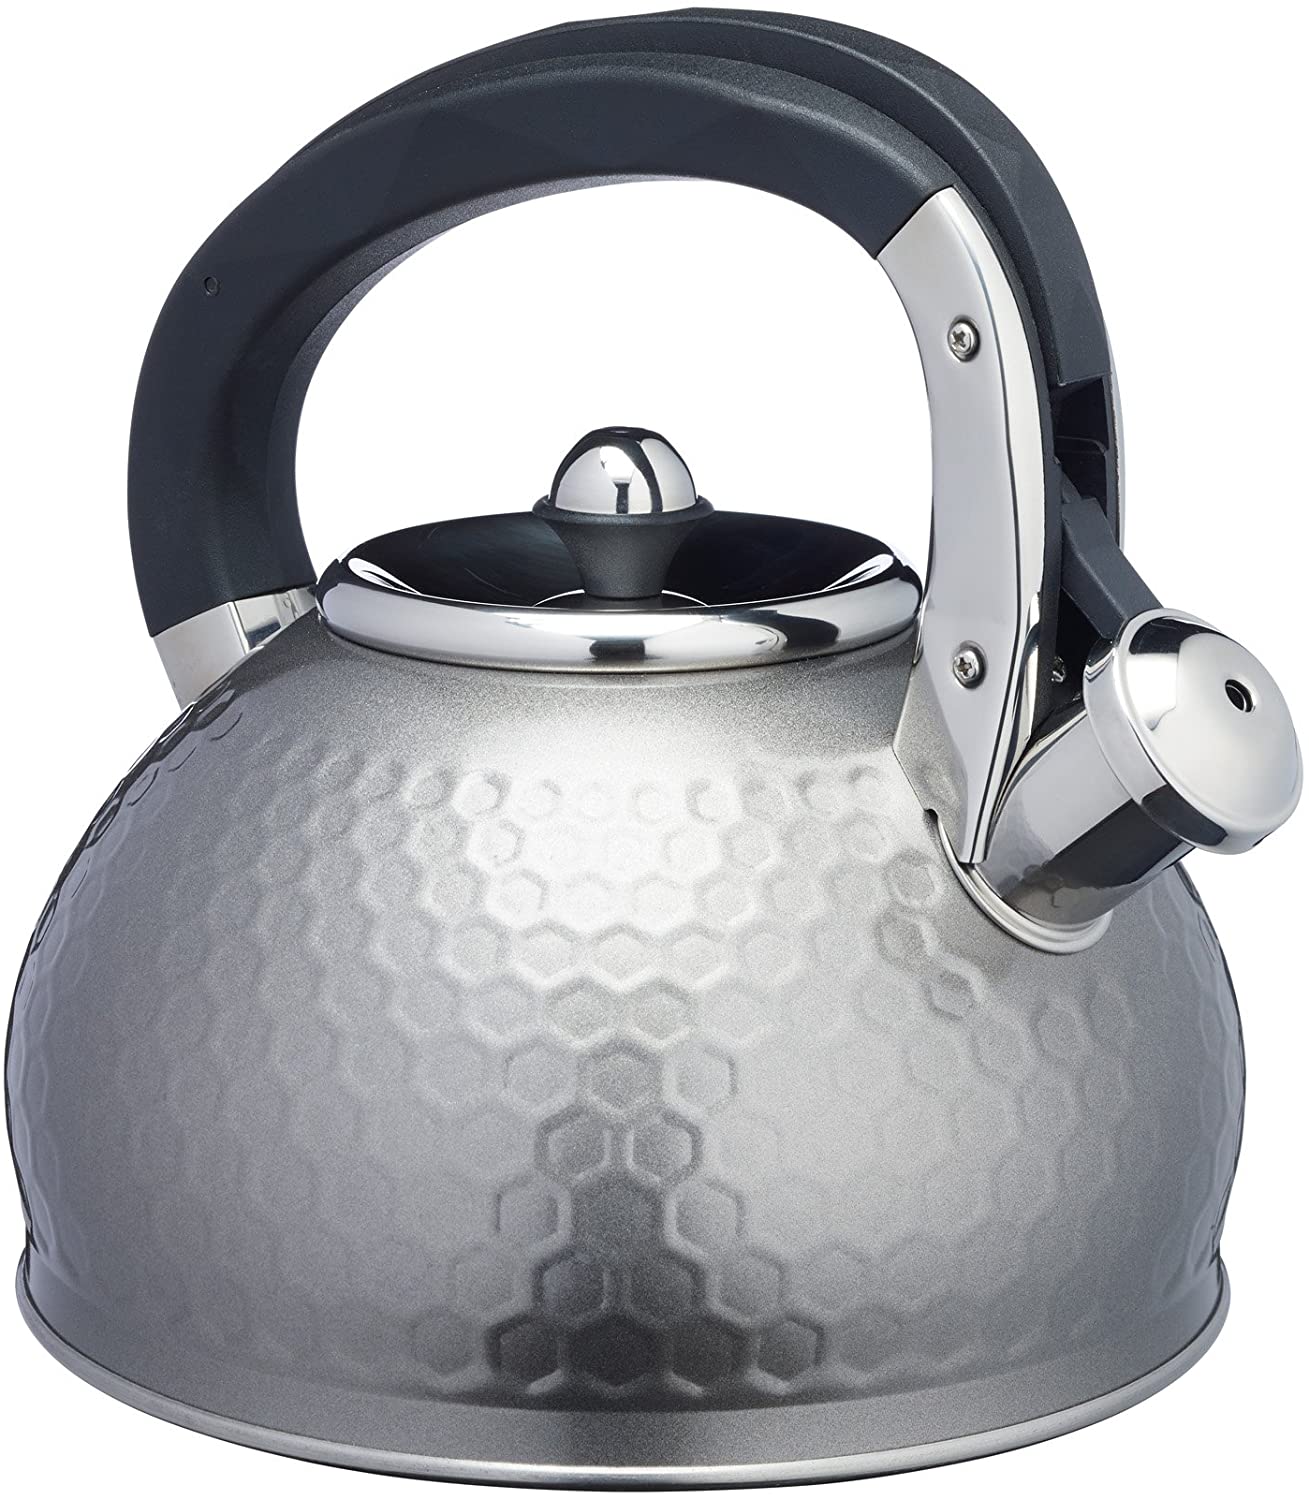 LOVELLO LOVKETGRY Textured Induction Hob Whistling Kettle, Steel, Shadow Grey